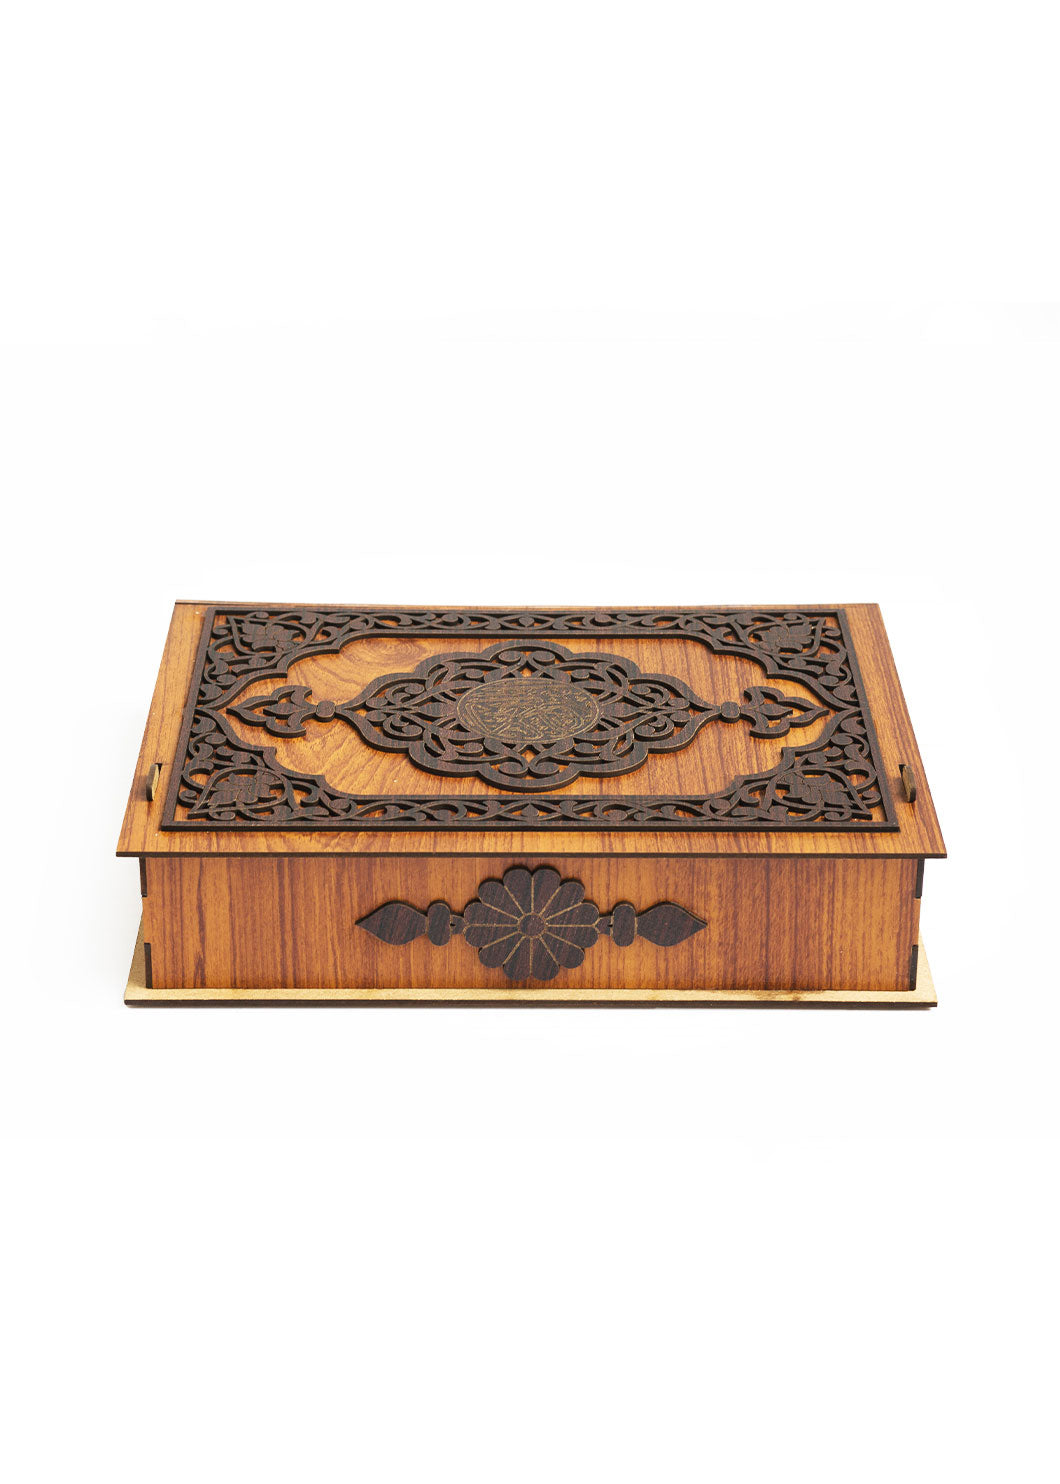 Brown And Dark Brown Wooden Box For Quran - Wooden Juzdaan - Quran Ghilaf - Premium Wooden Box - For Quran